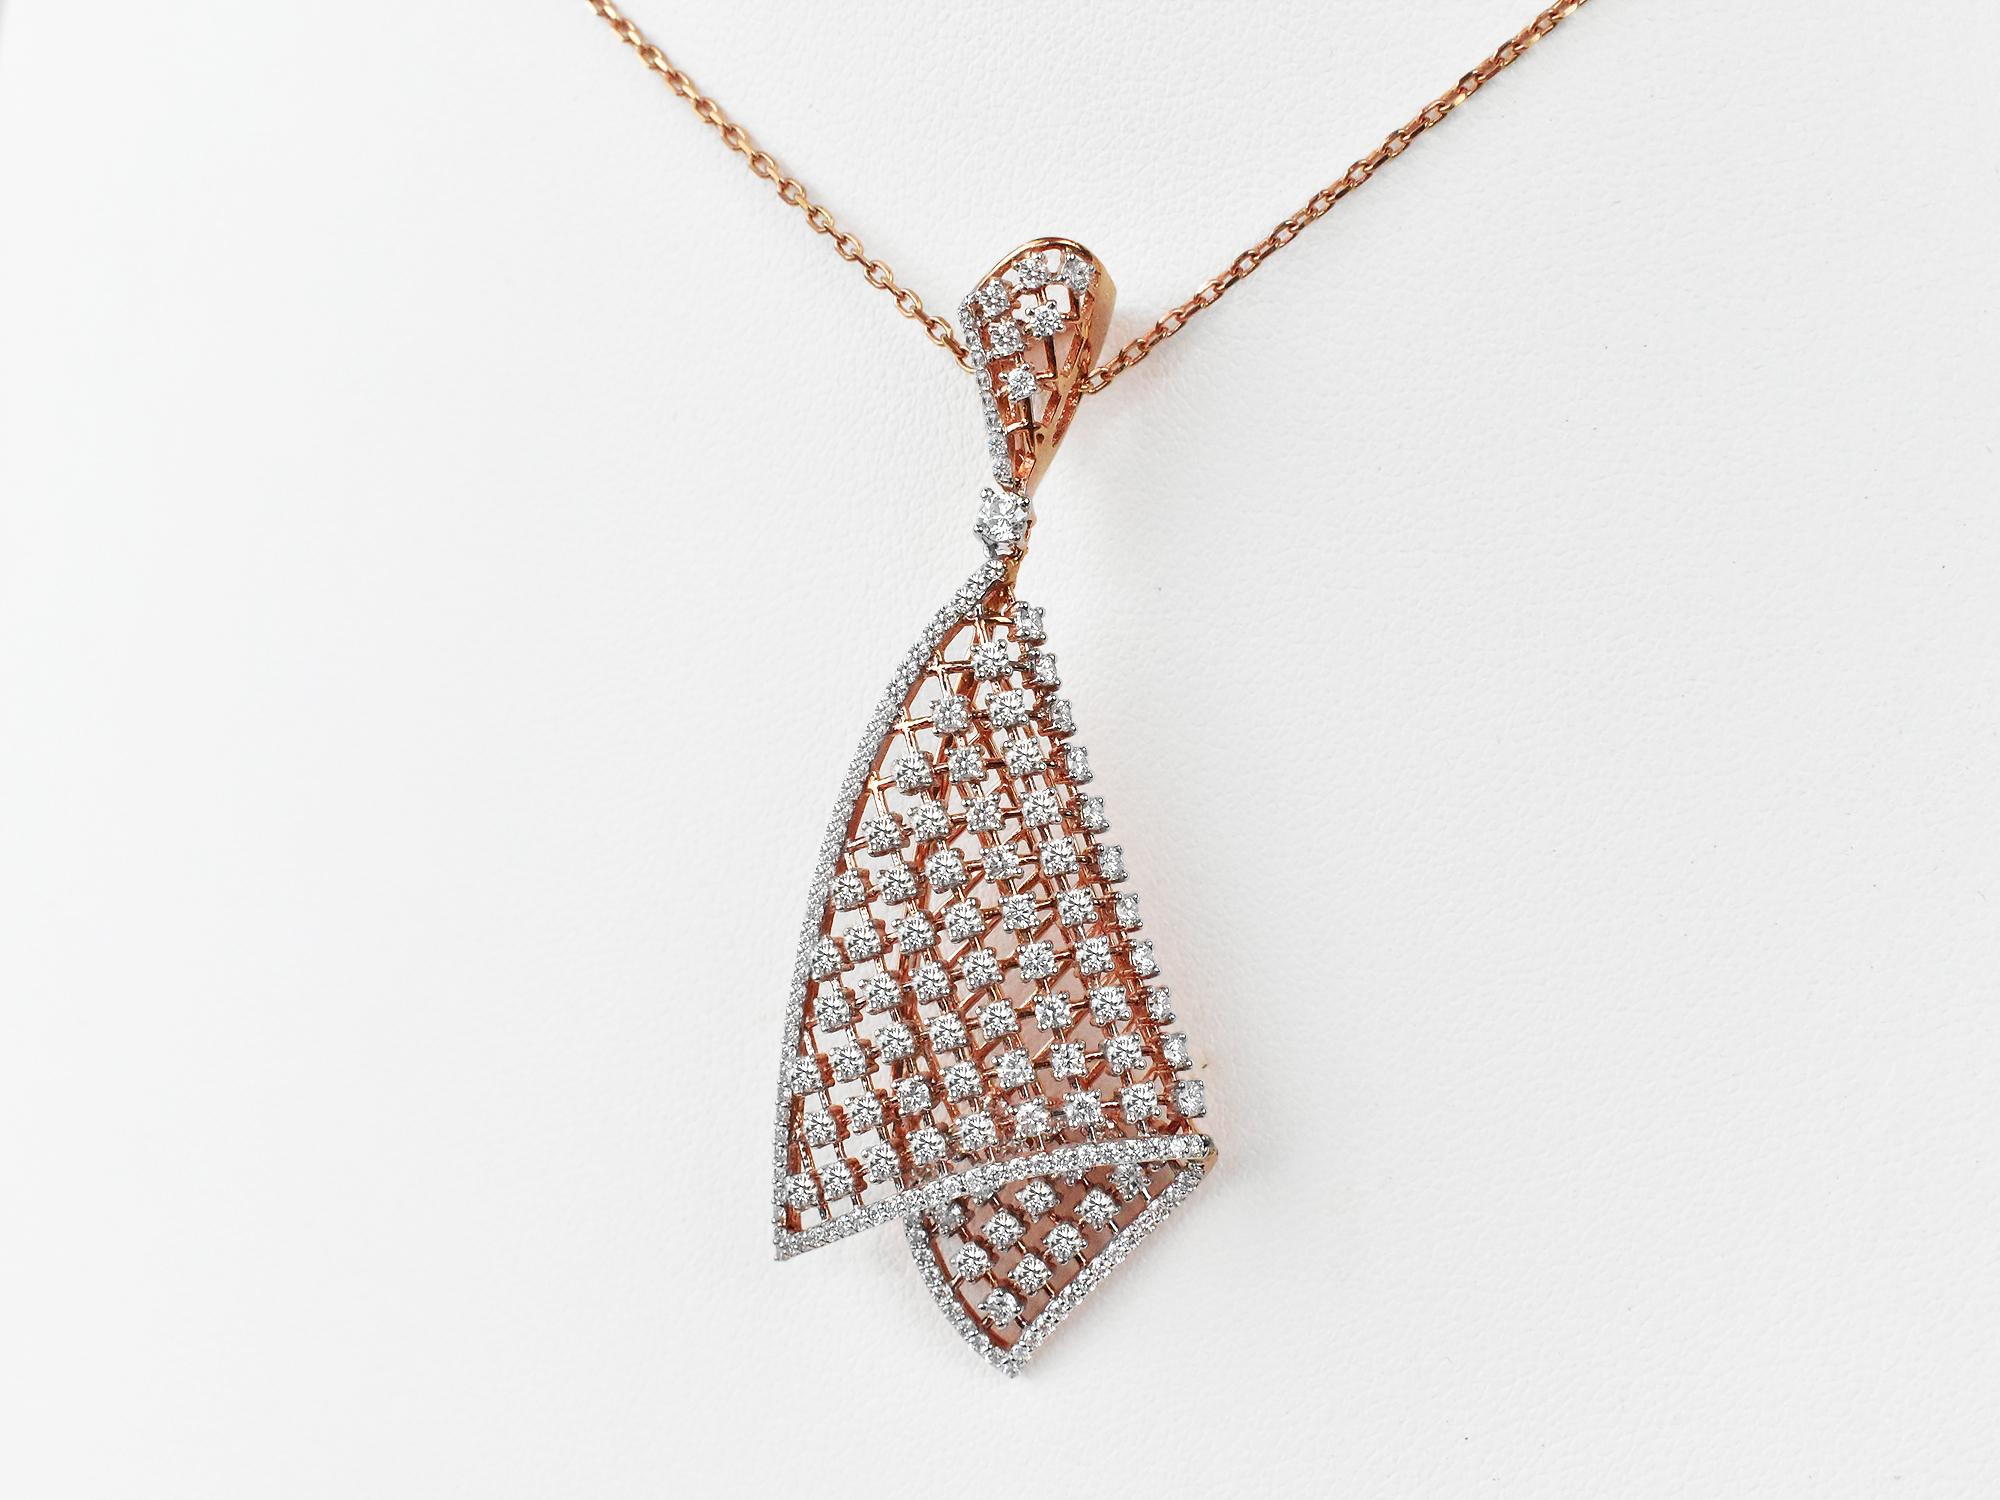 18Karat Gold Pendant Necklace Rose Gold Diamond Pave Fashion Pendant Necklace
       A fashion Art Nouveau pendant necklace is fully paved with brilliant-cut diamonds set in stunning 18K rose gold. Crafted with the joyful and brilliant spirit of